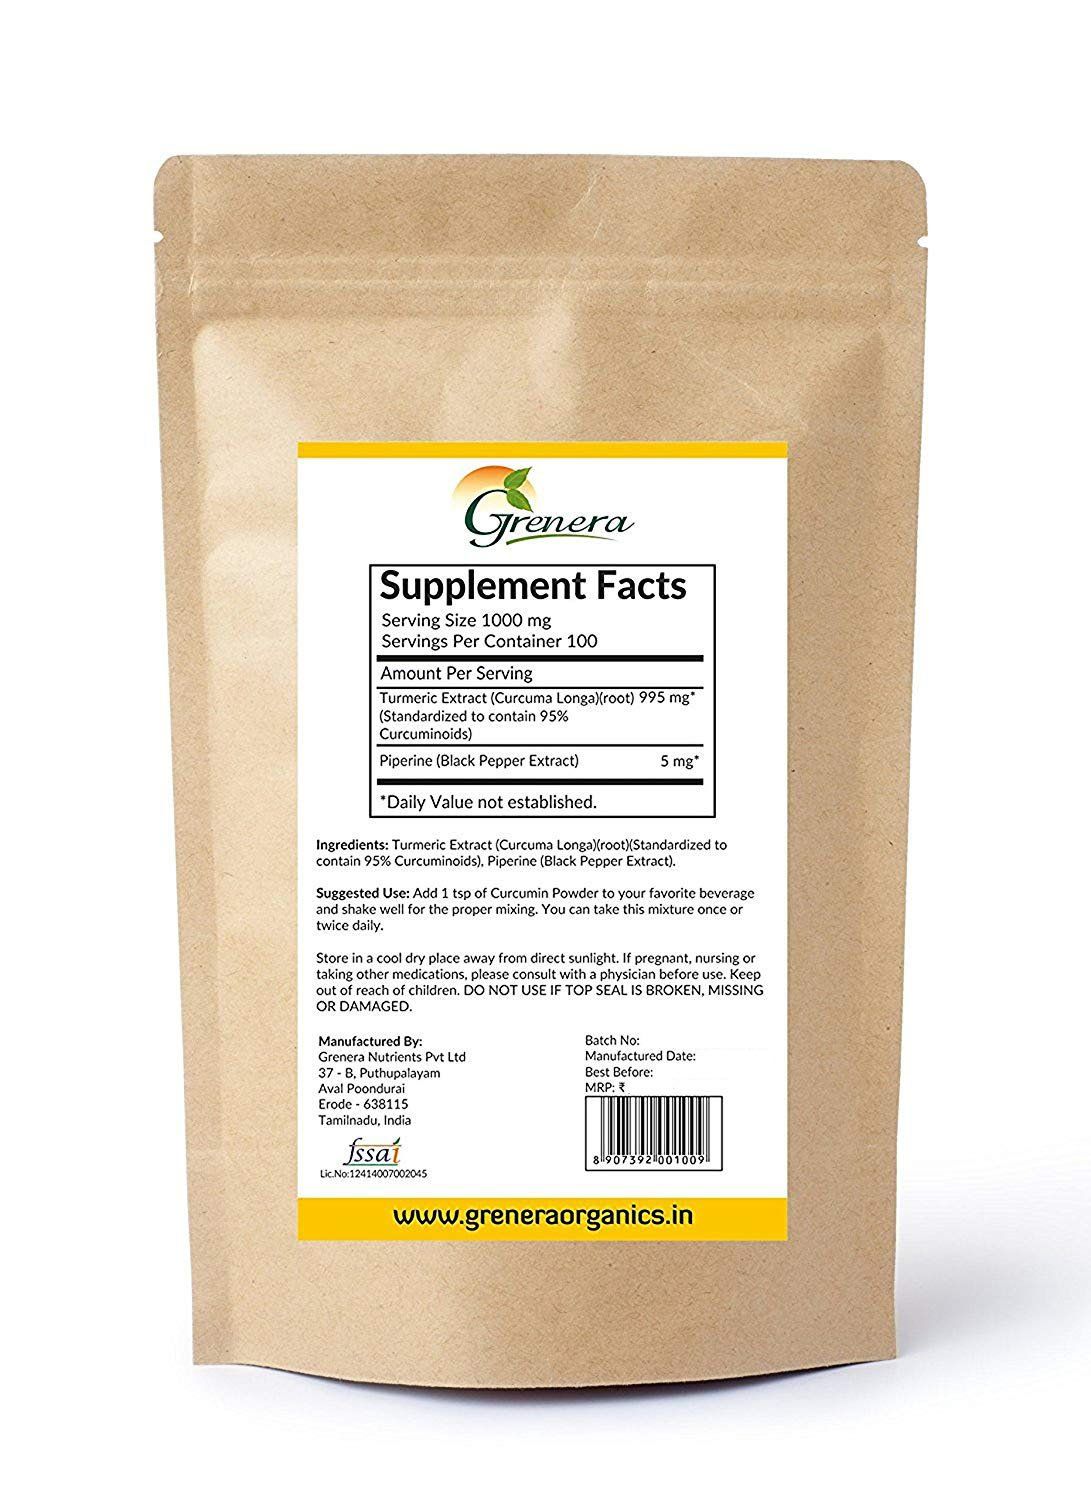 Grenera Curcumin Extract with Piperine Extract Image